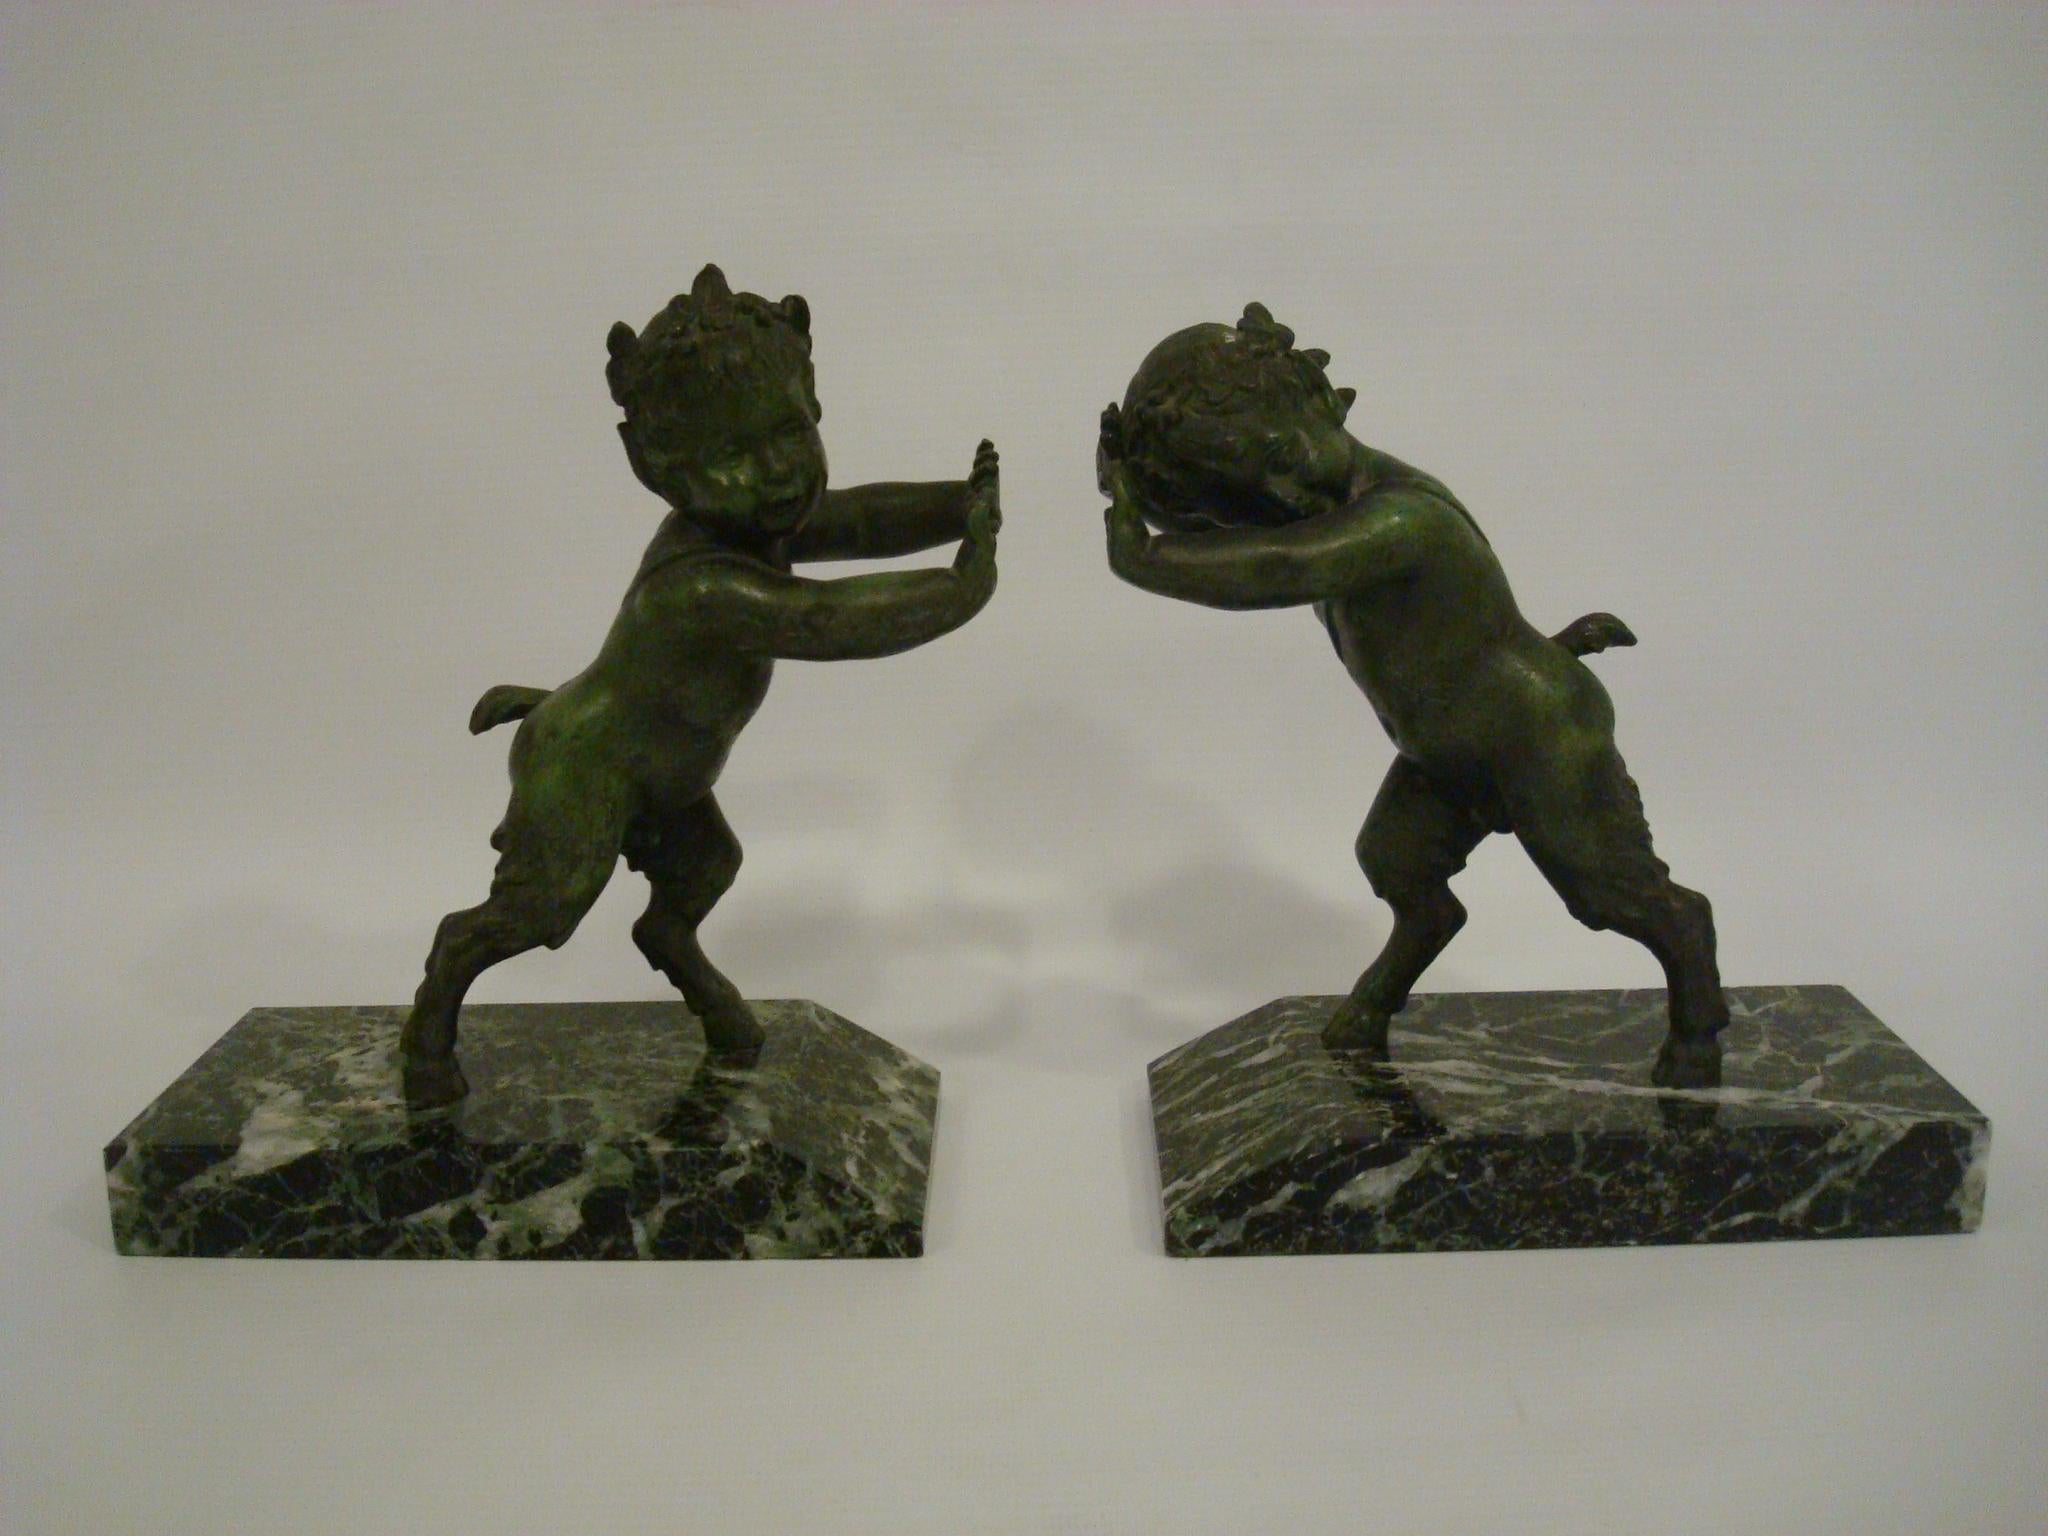 Pair of Art Deco bookends sculptures signed Carlier depicting a young satyrs or Fauns.
Émile Joseph Carlier (1849-1927)
Signature/ Marks: Carlier.
Style: Art Deco.
Condition: Good original condition.
Date: circa 1920´s
Material: White metal,